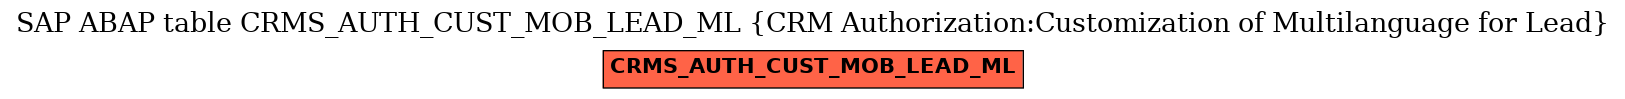 E-R Diagram for table CRMS_AUTH_CUST_MOB_LEAD_ML (CRM Authorization:Customization of Multilanguage for Lead)